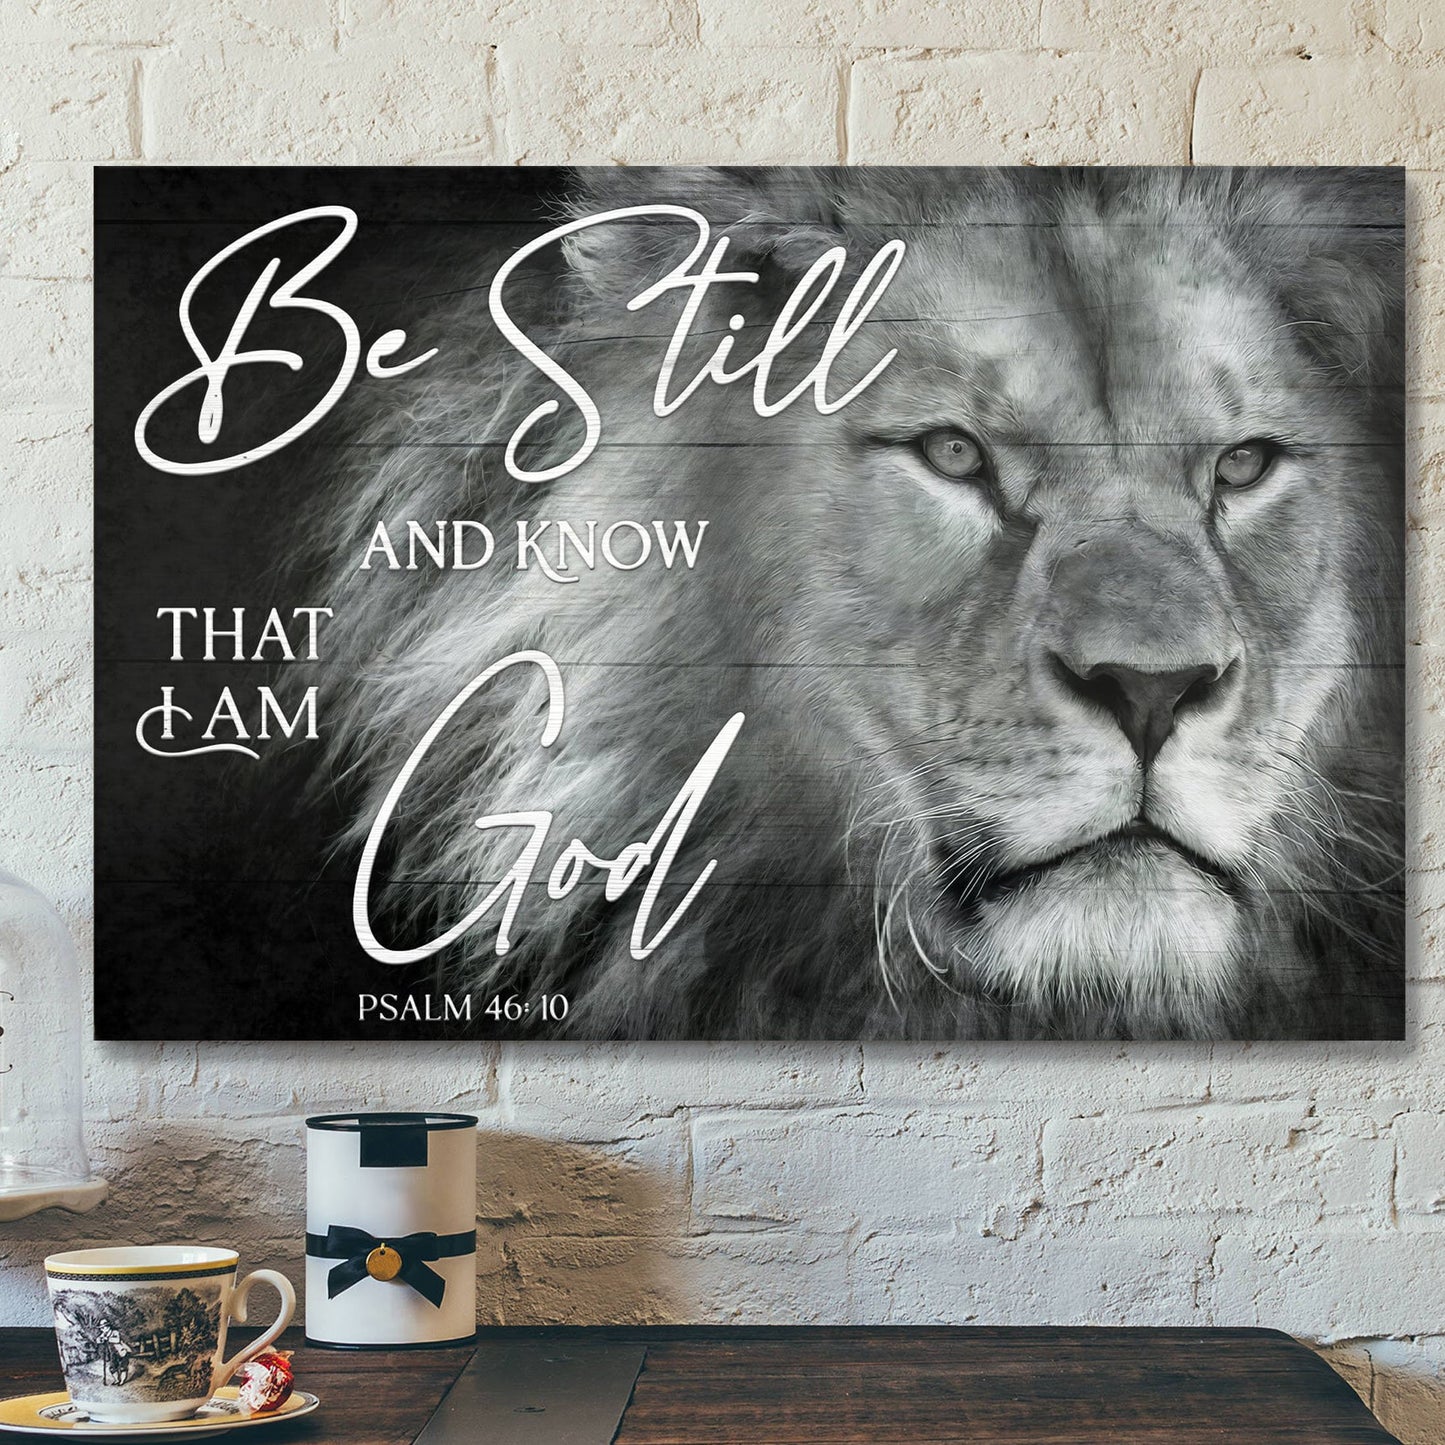 Jesus God Landscape Canvas Prints - God Wall Art - Be Still And Know That I Am God - Black And White Lion - Ciaocustom